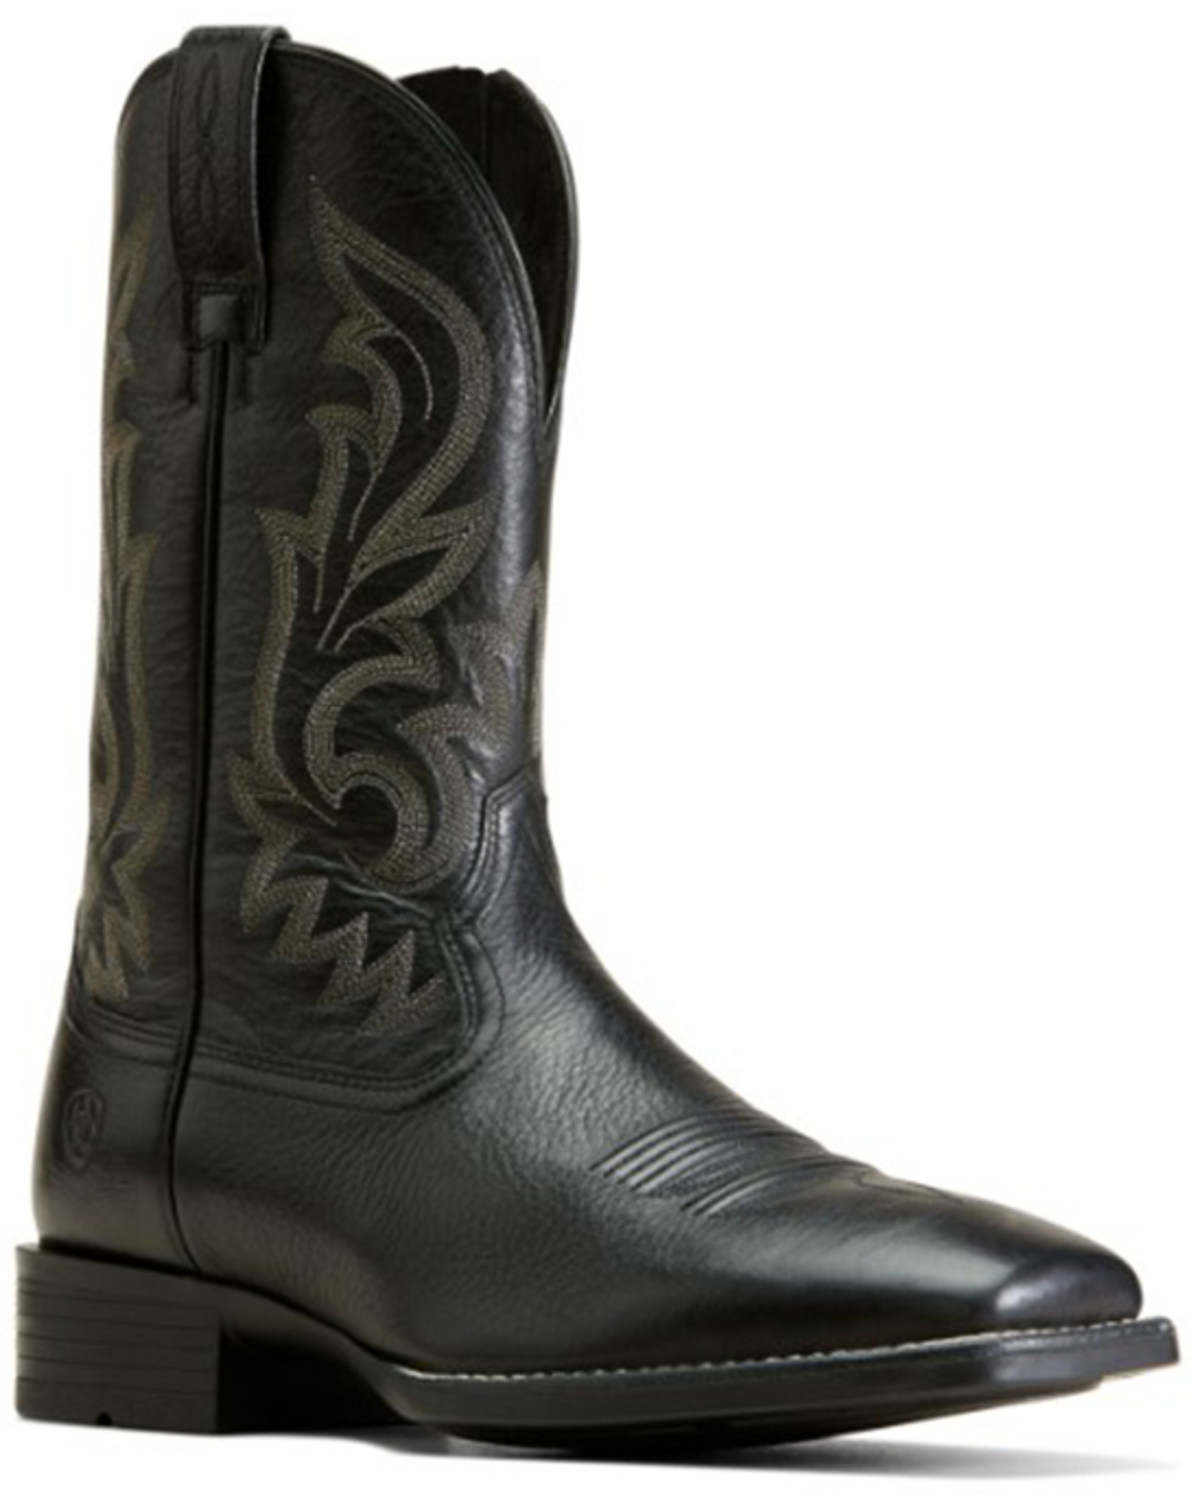 Ariat Men's Ultra Performance Western Boots - Broad Square Toe